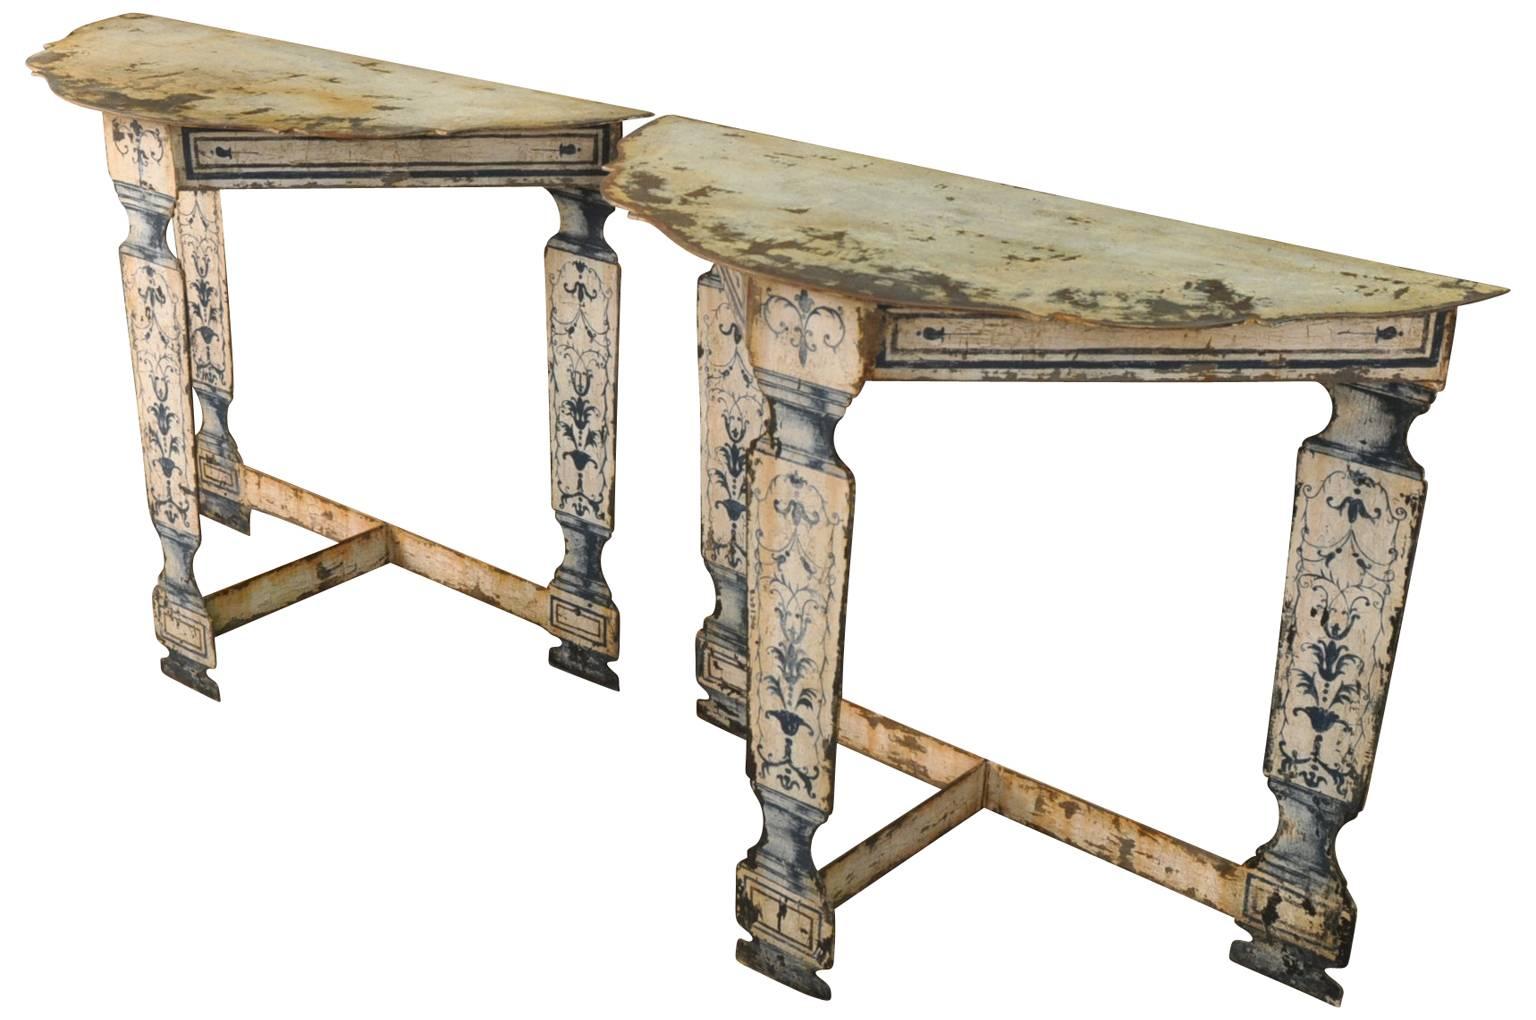 A terrific pair of demilune consoles constructed from painted metal in an 18th century fashion.